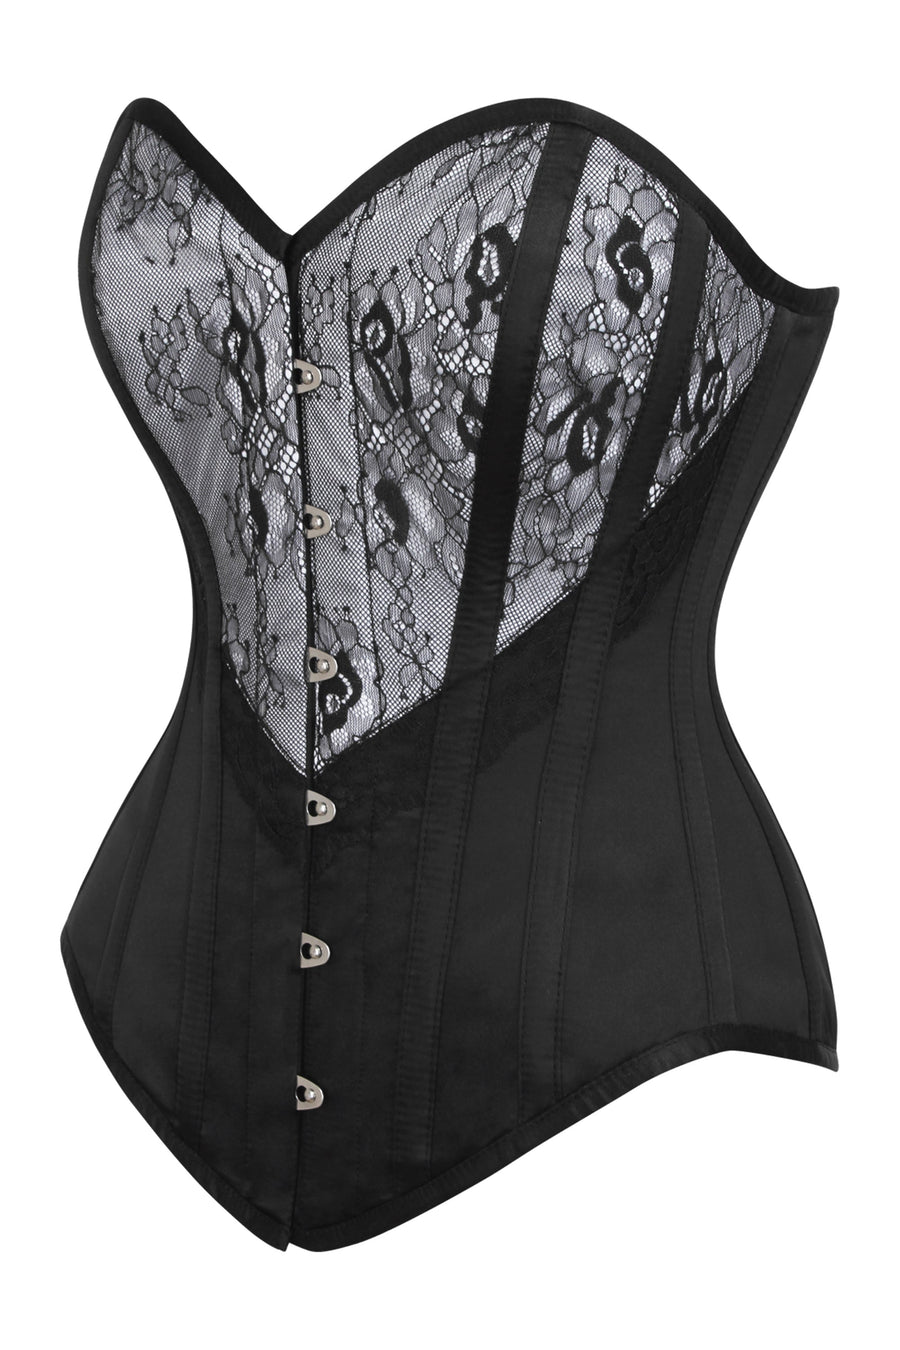 Gothic Black and White Cotton Striped With Red Frill Overbust Corset